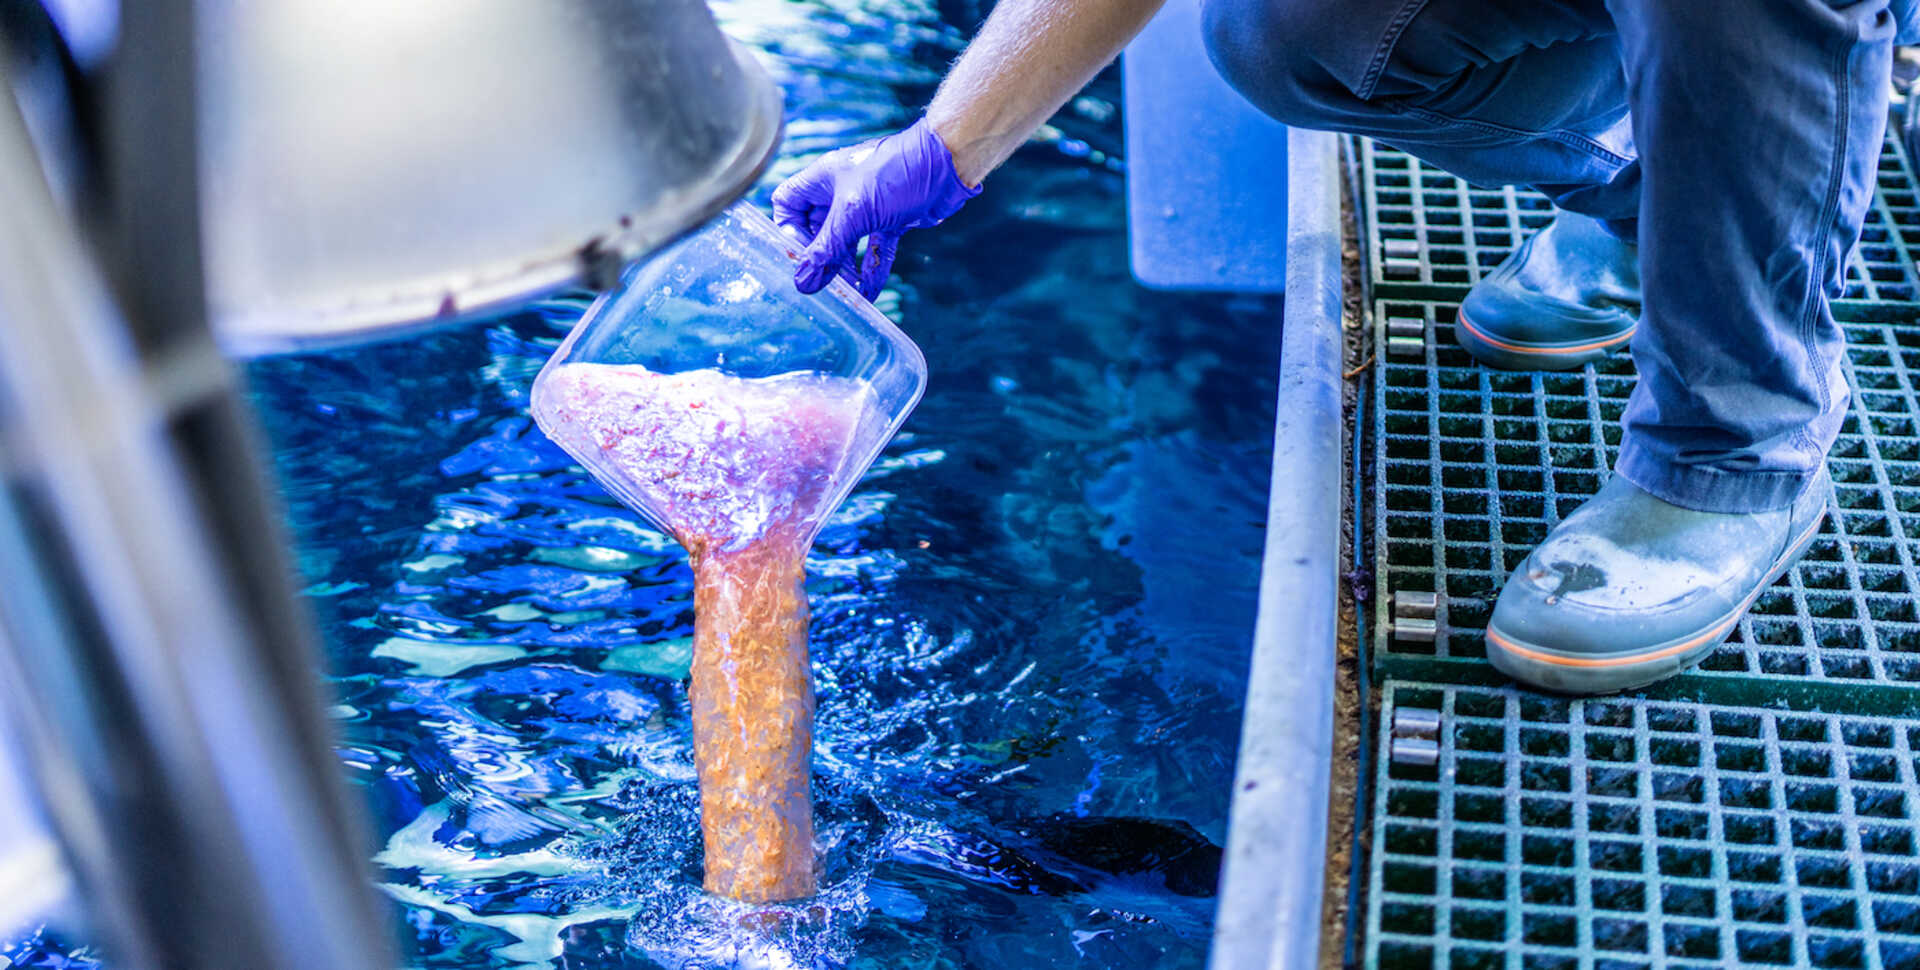 Biologist Walker Calhoun pours krill into Philippine Coral Reef tank.